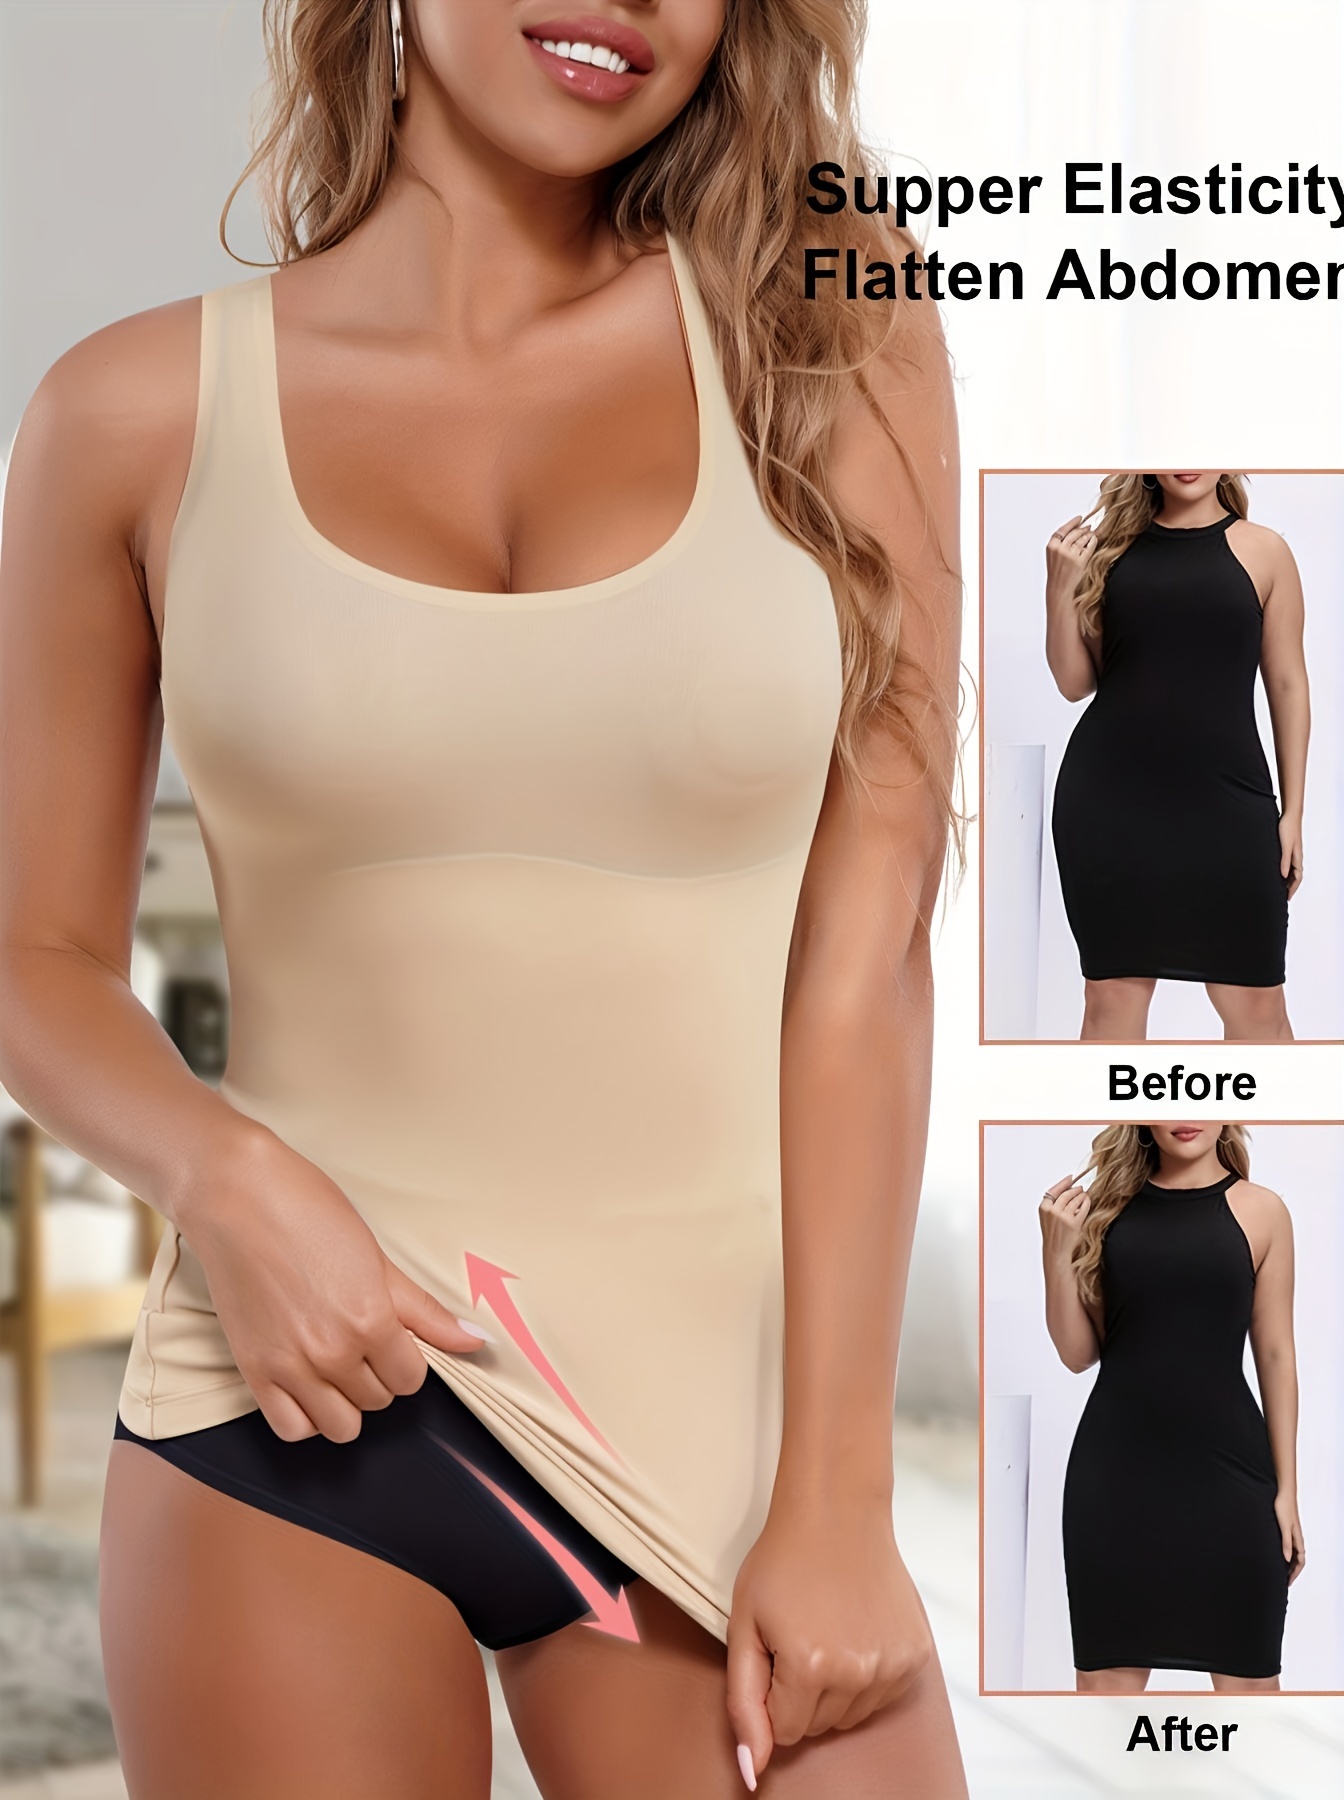 Shapewear Tops for Women Comfort Daily Tummy Control Camisole Seamless  Slimming Vest Sleeveless For Dress Suit Wearing 